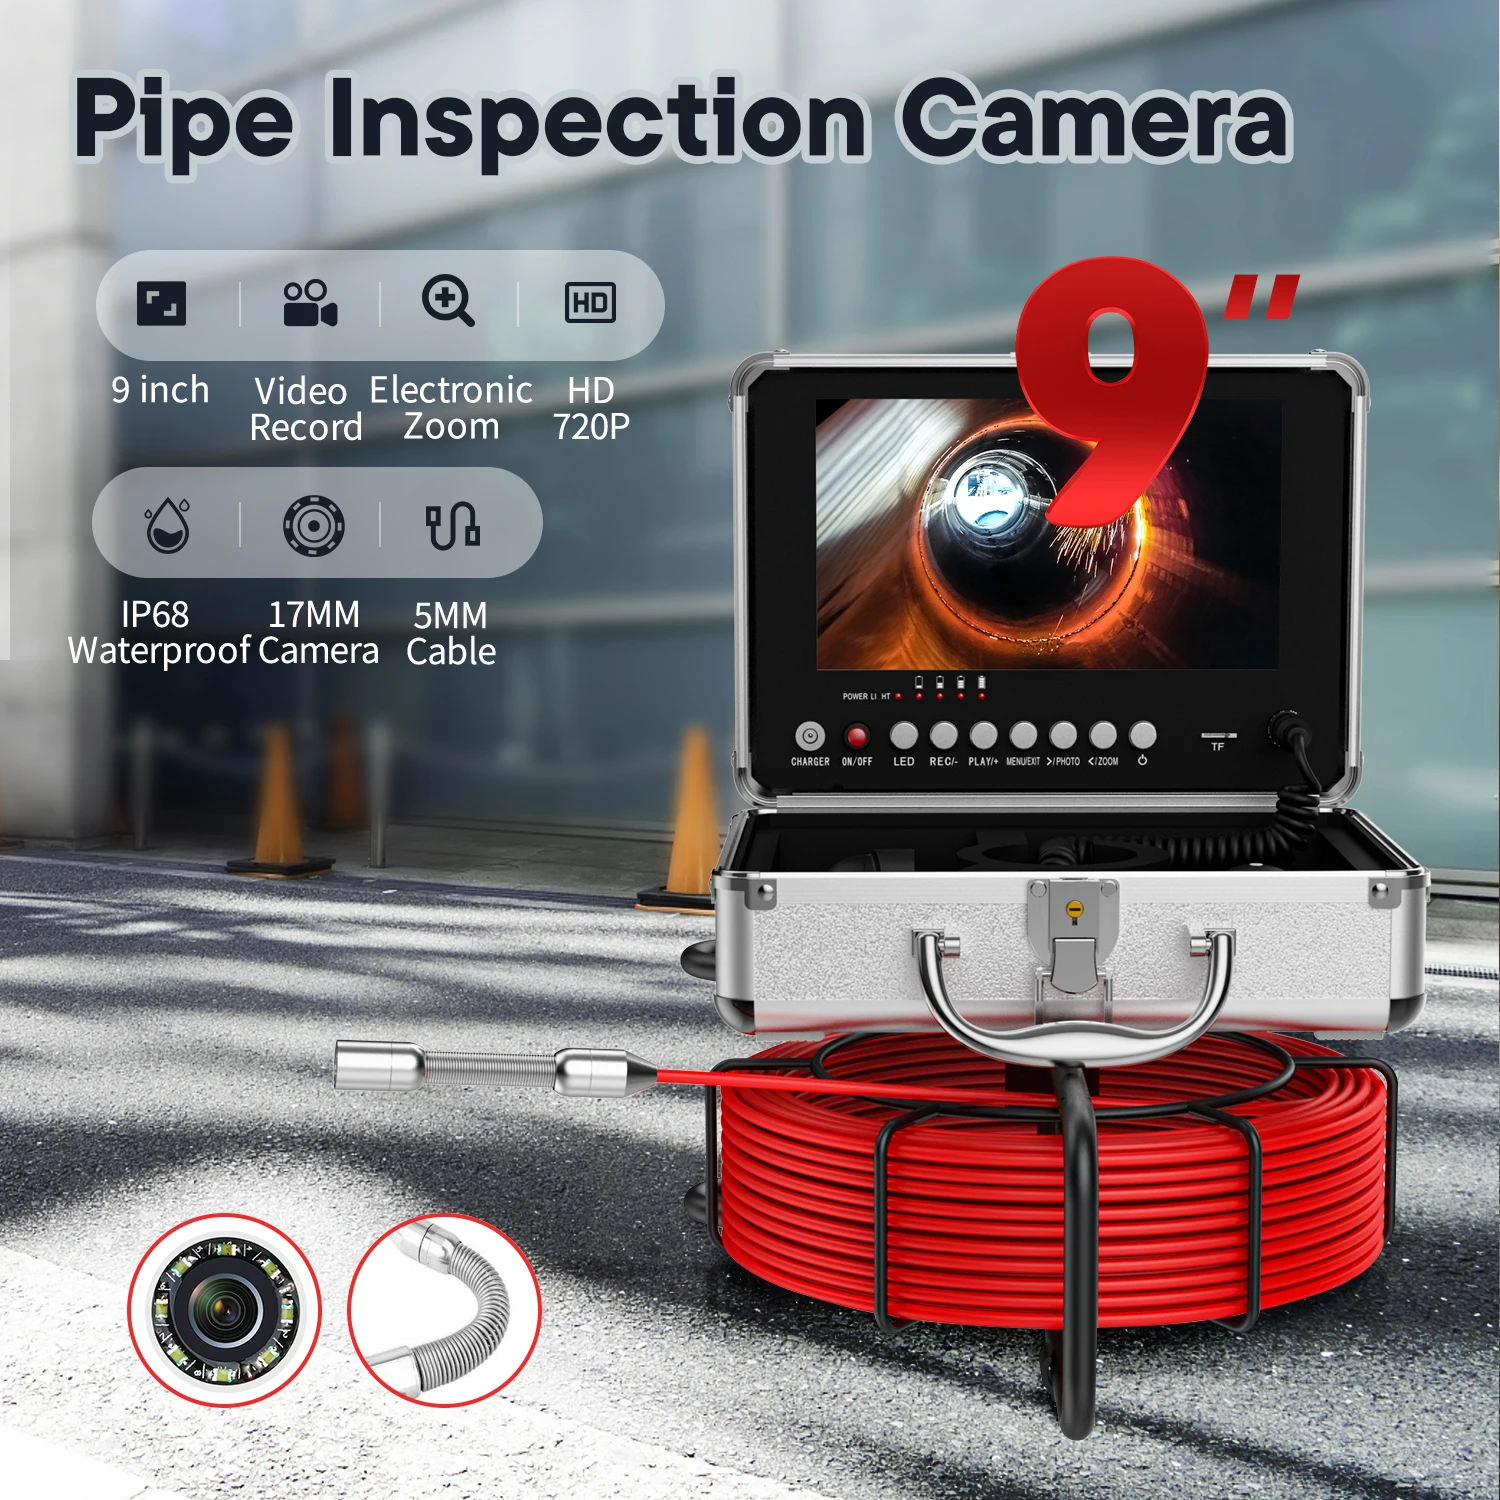 10 IPS Pipe Sewer Drain Inspection Camera 20M 30M 50M 512hz Transmitter  AHD 1080P Screen Video+Audio Recording 5X Image Enlarge - AliExpress